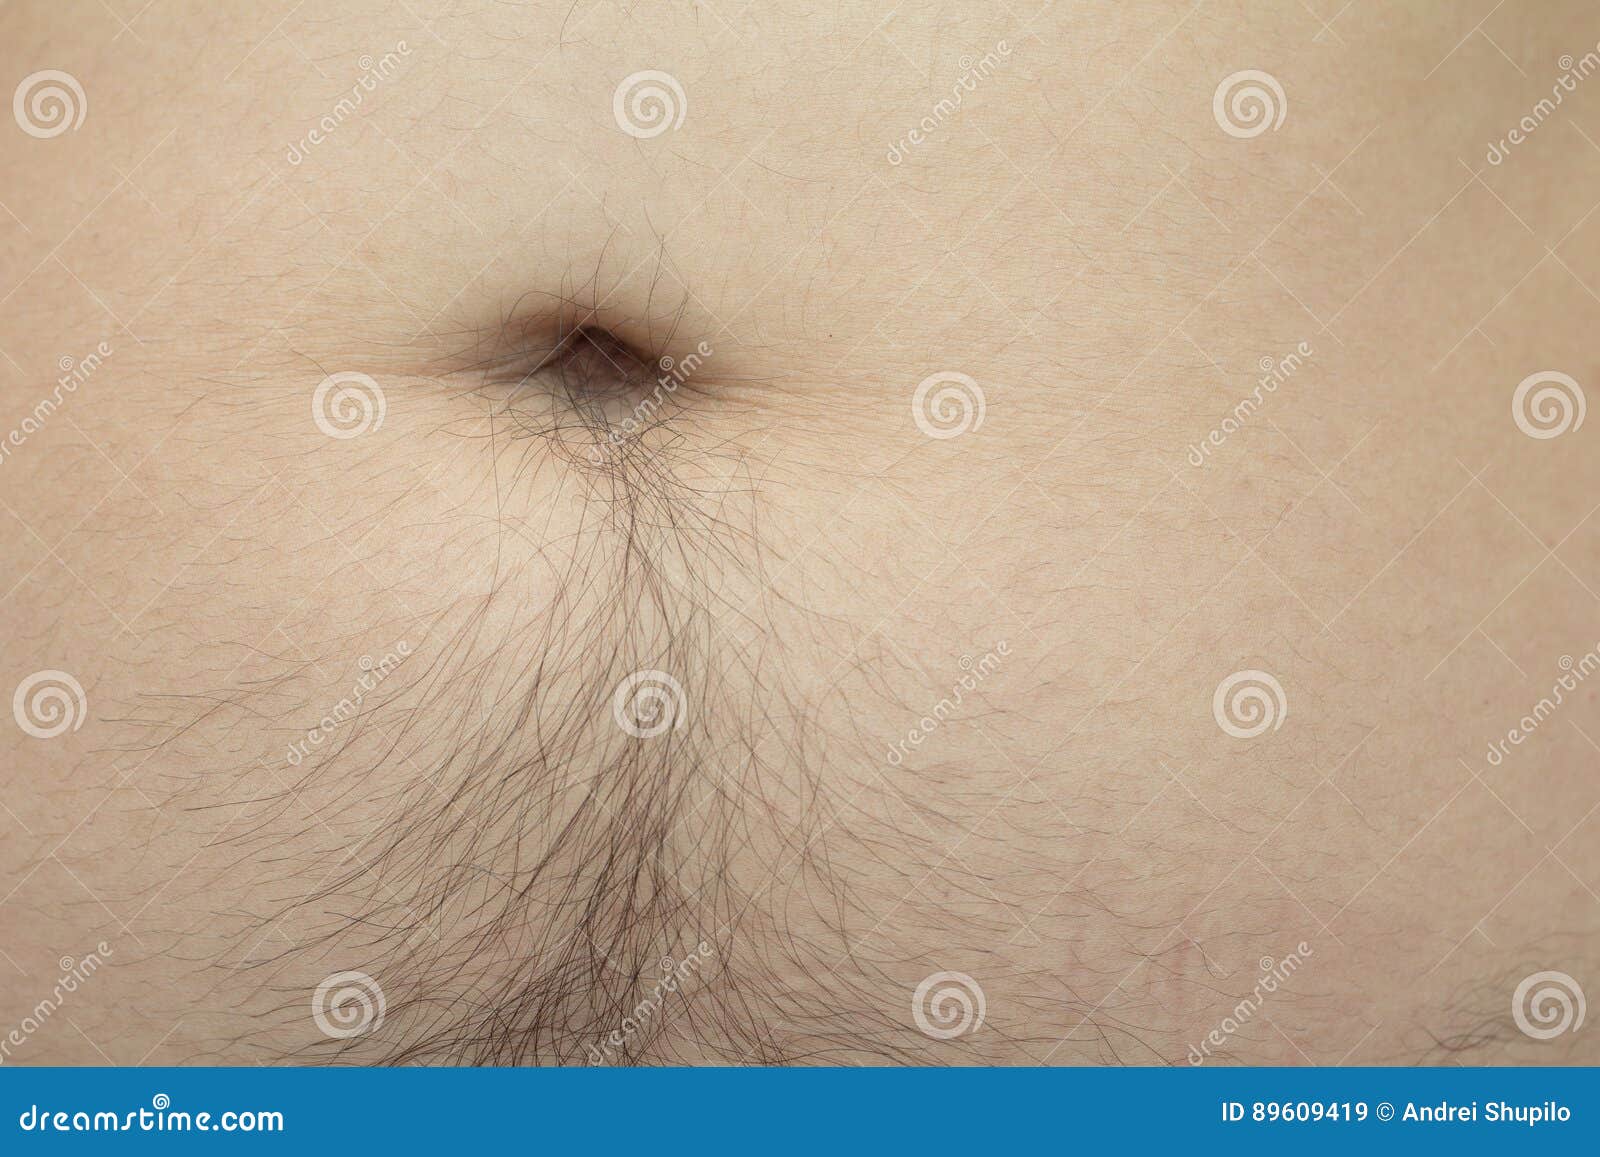 Male Hairs Belly, Bellybutton Stock Image - Image of crinigerous,  sensuality: 89609419